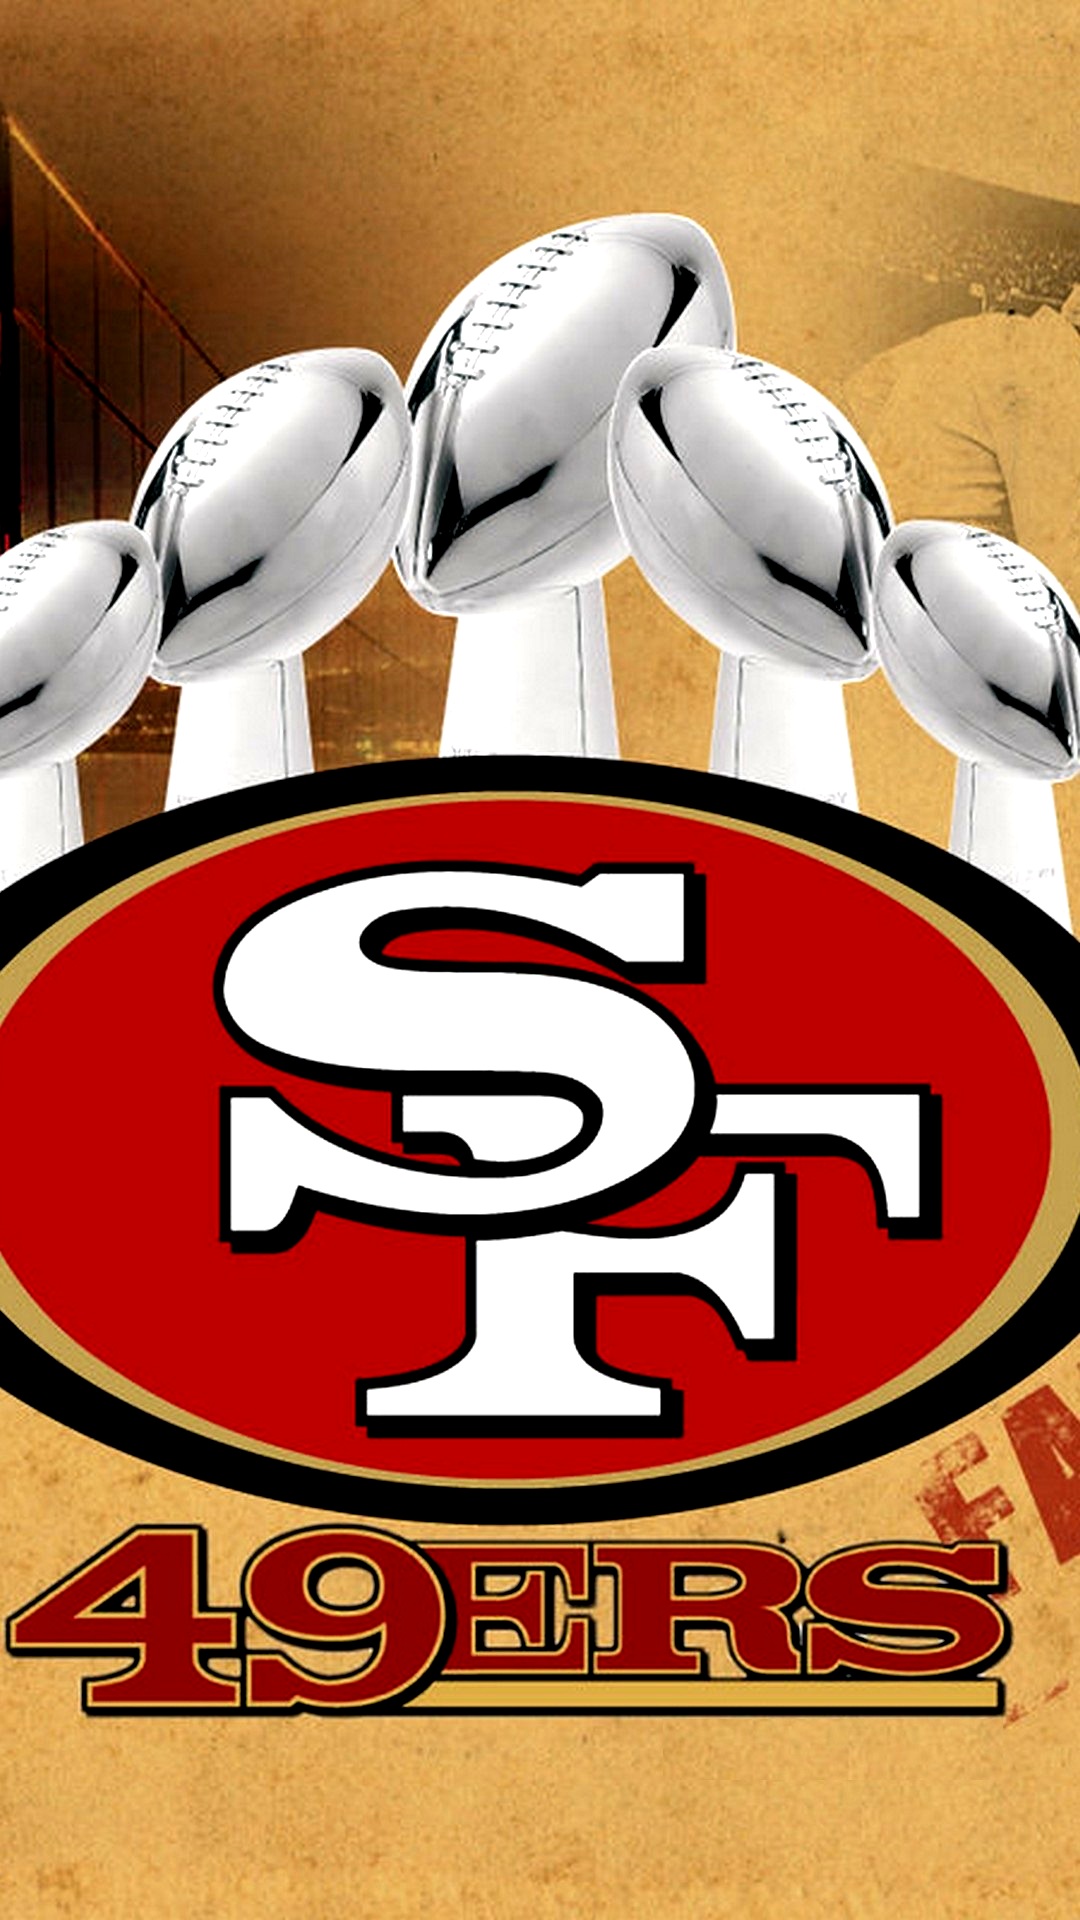 San Francisco 49ers iPhone Screen Lock Wallpaper With high-resolution 1080X1920 pixel. Download and set as wallpaper for Desktop Computer, Apple iPhone X, XS Max, XR, 8, 7, 6, SE, iPad, Android